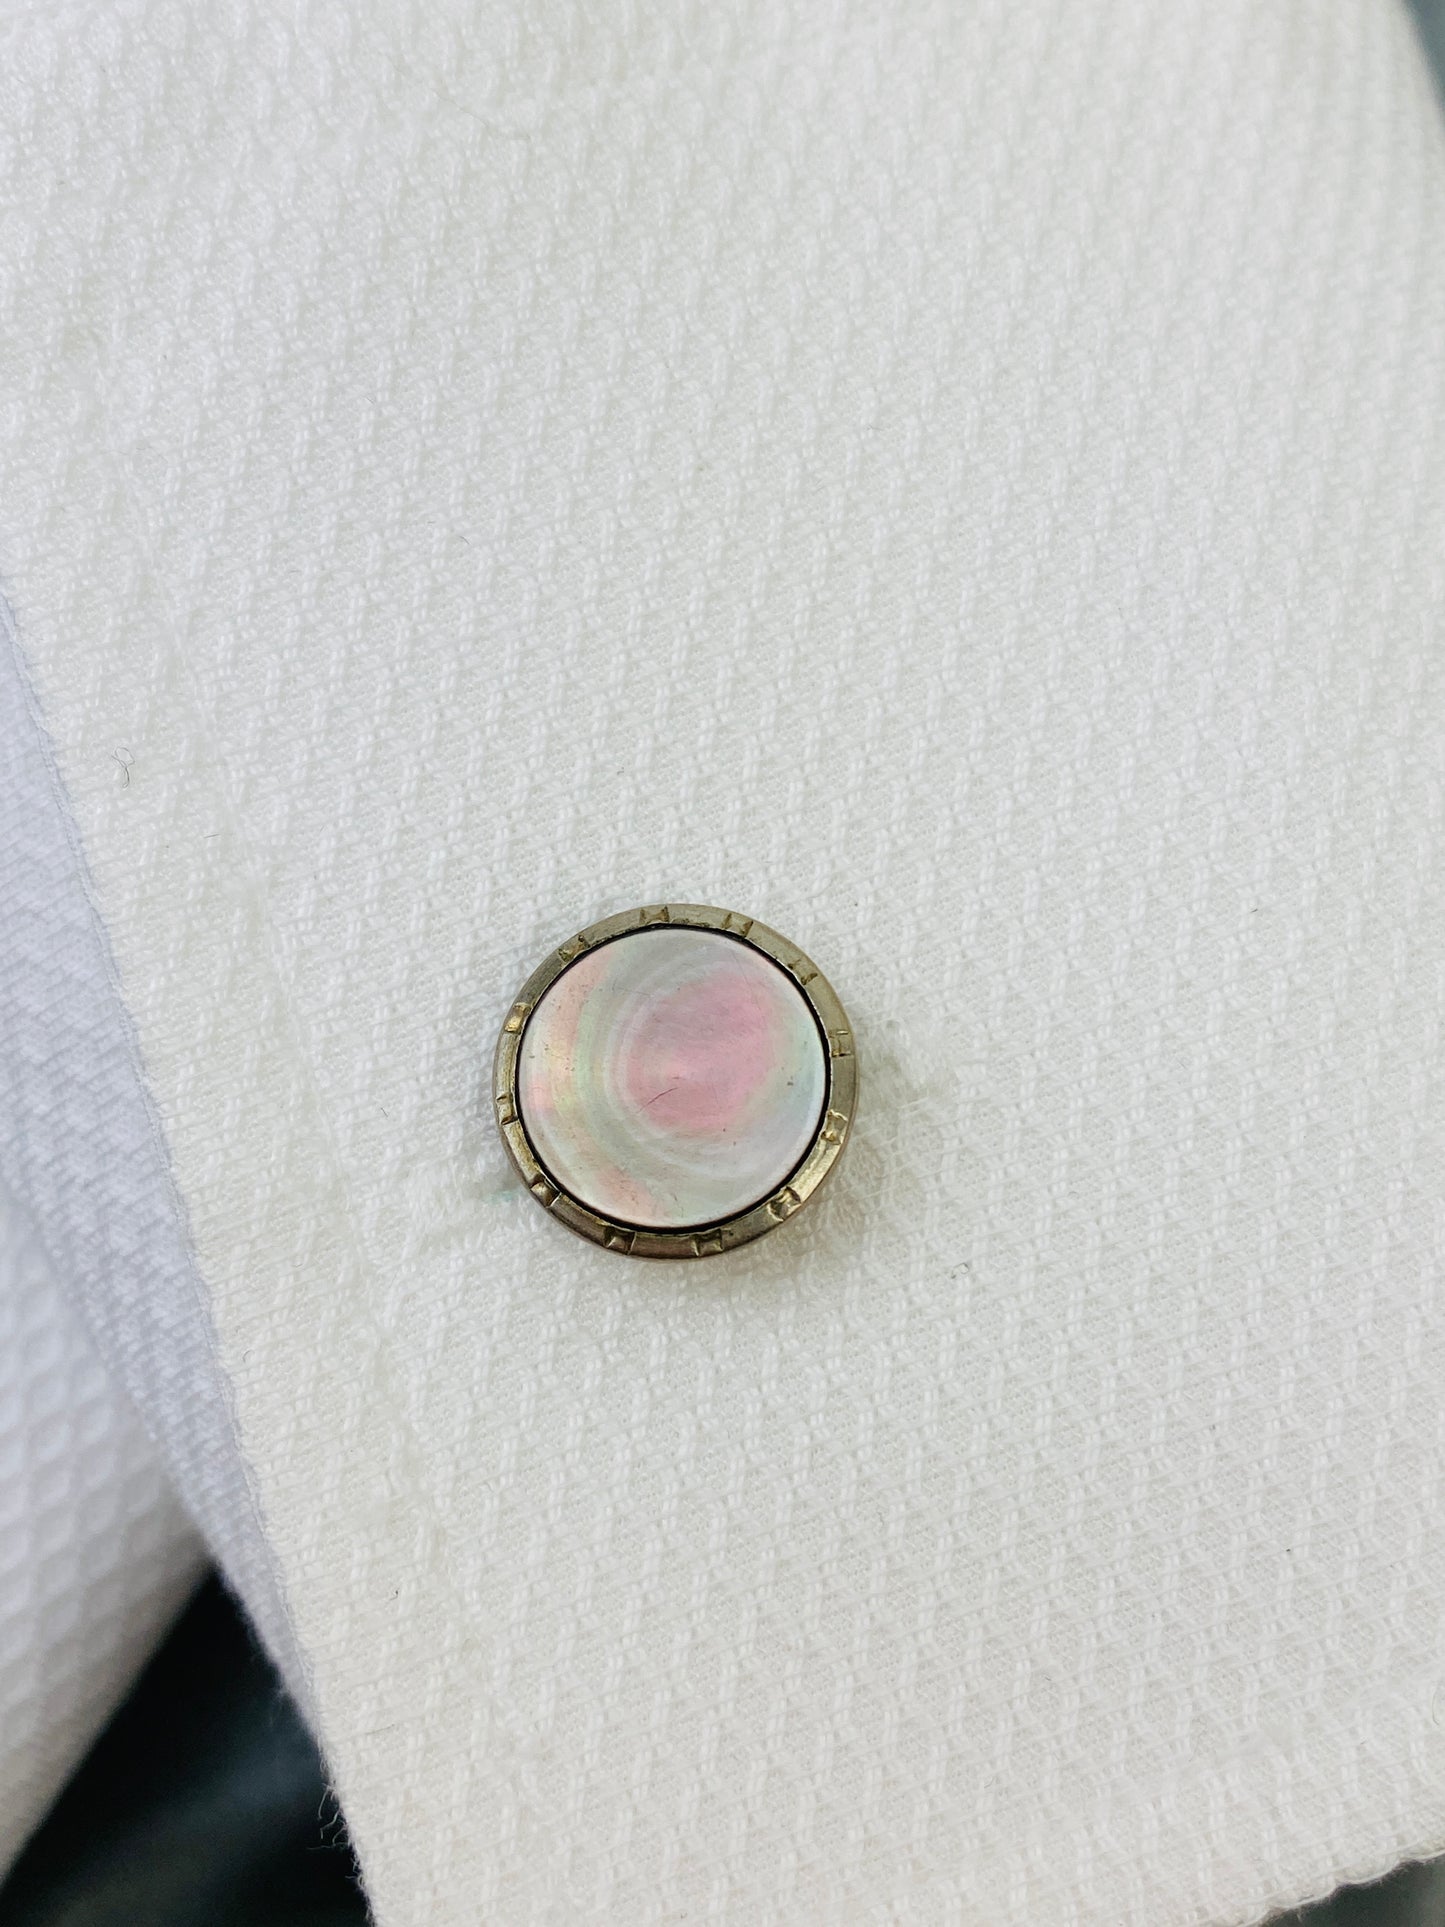 Vintage Edwardian 1910s Men's Cufflinks, Round Silver with Mother of Pearl Inlay, Gold Plated